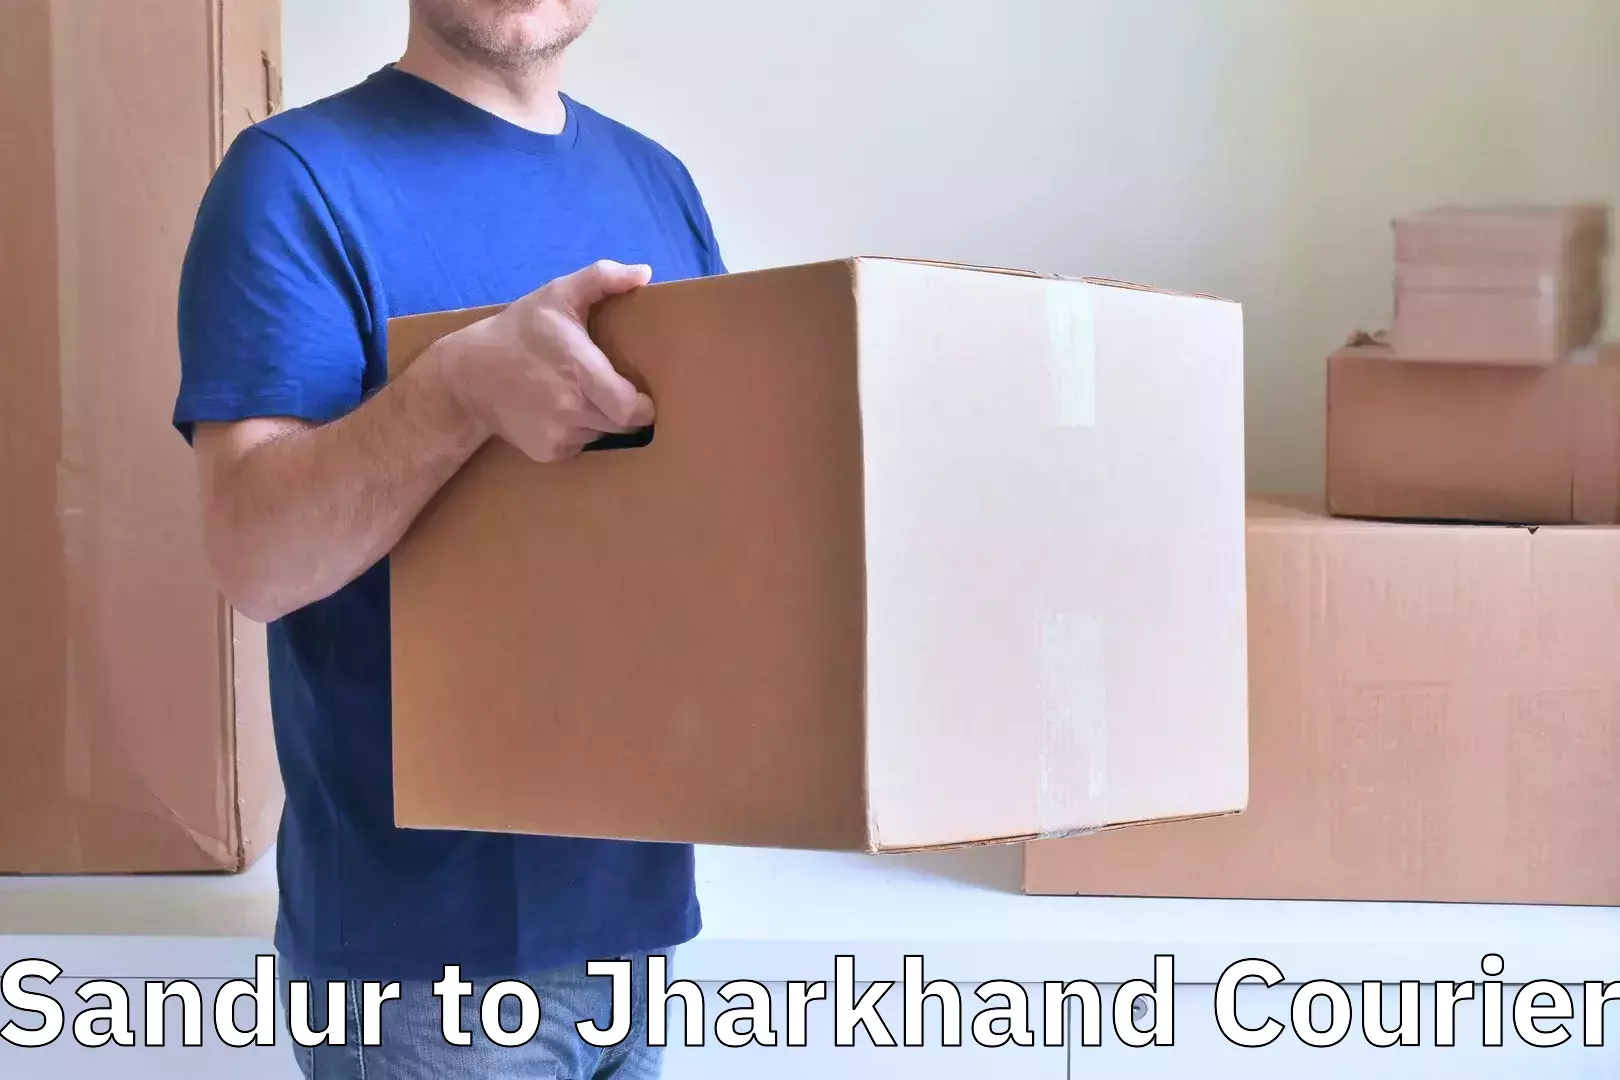 Luggage shipment specialists in Sandur to Jharkhand